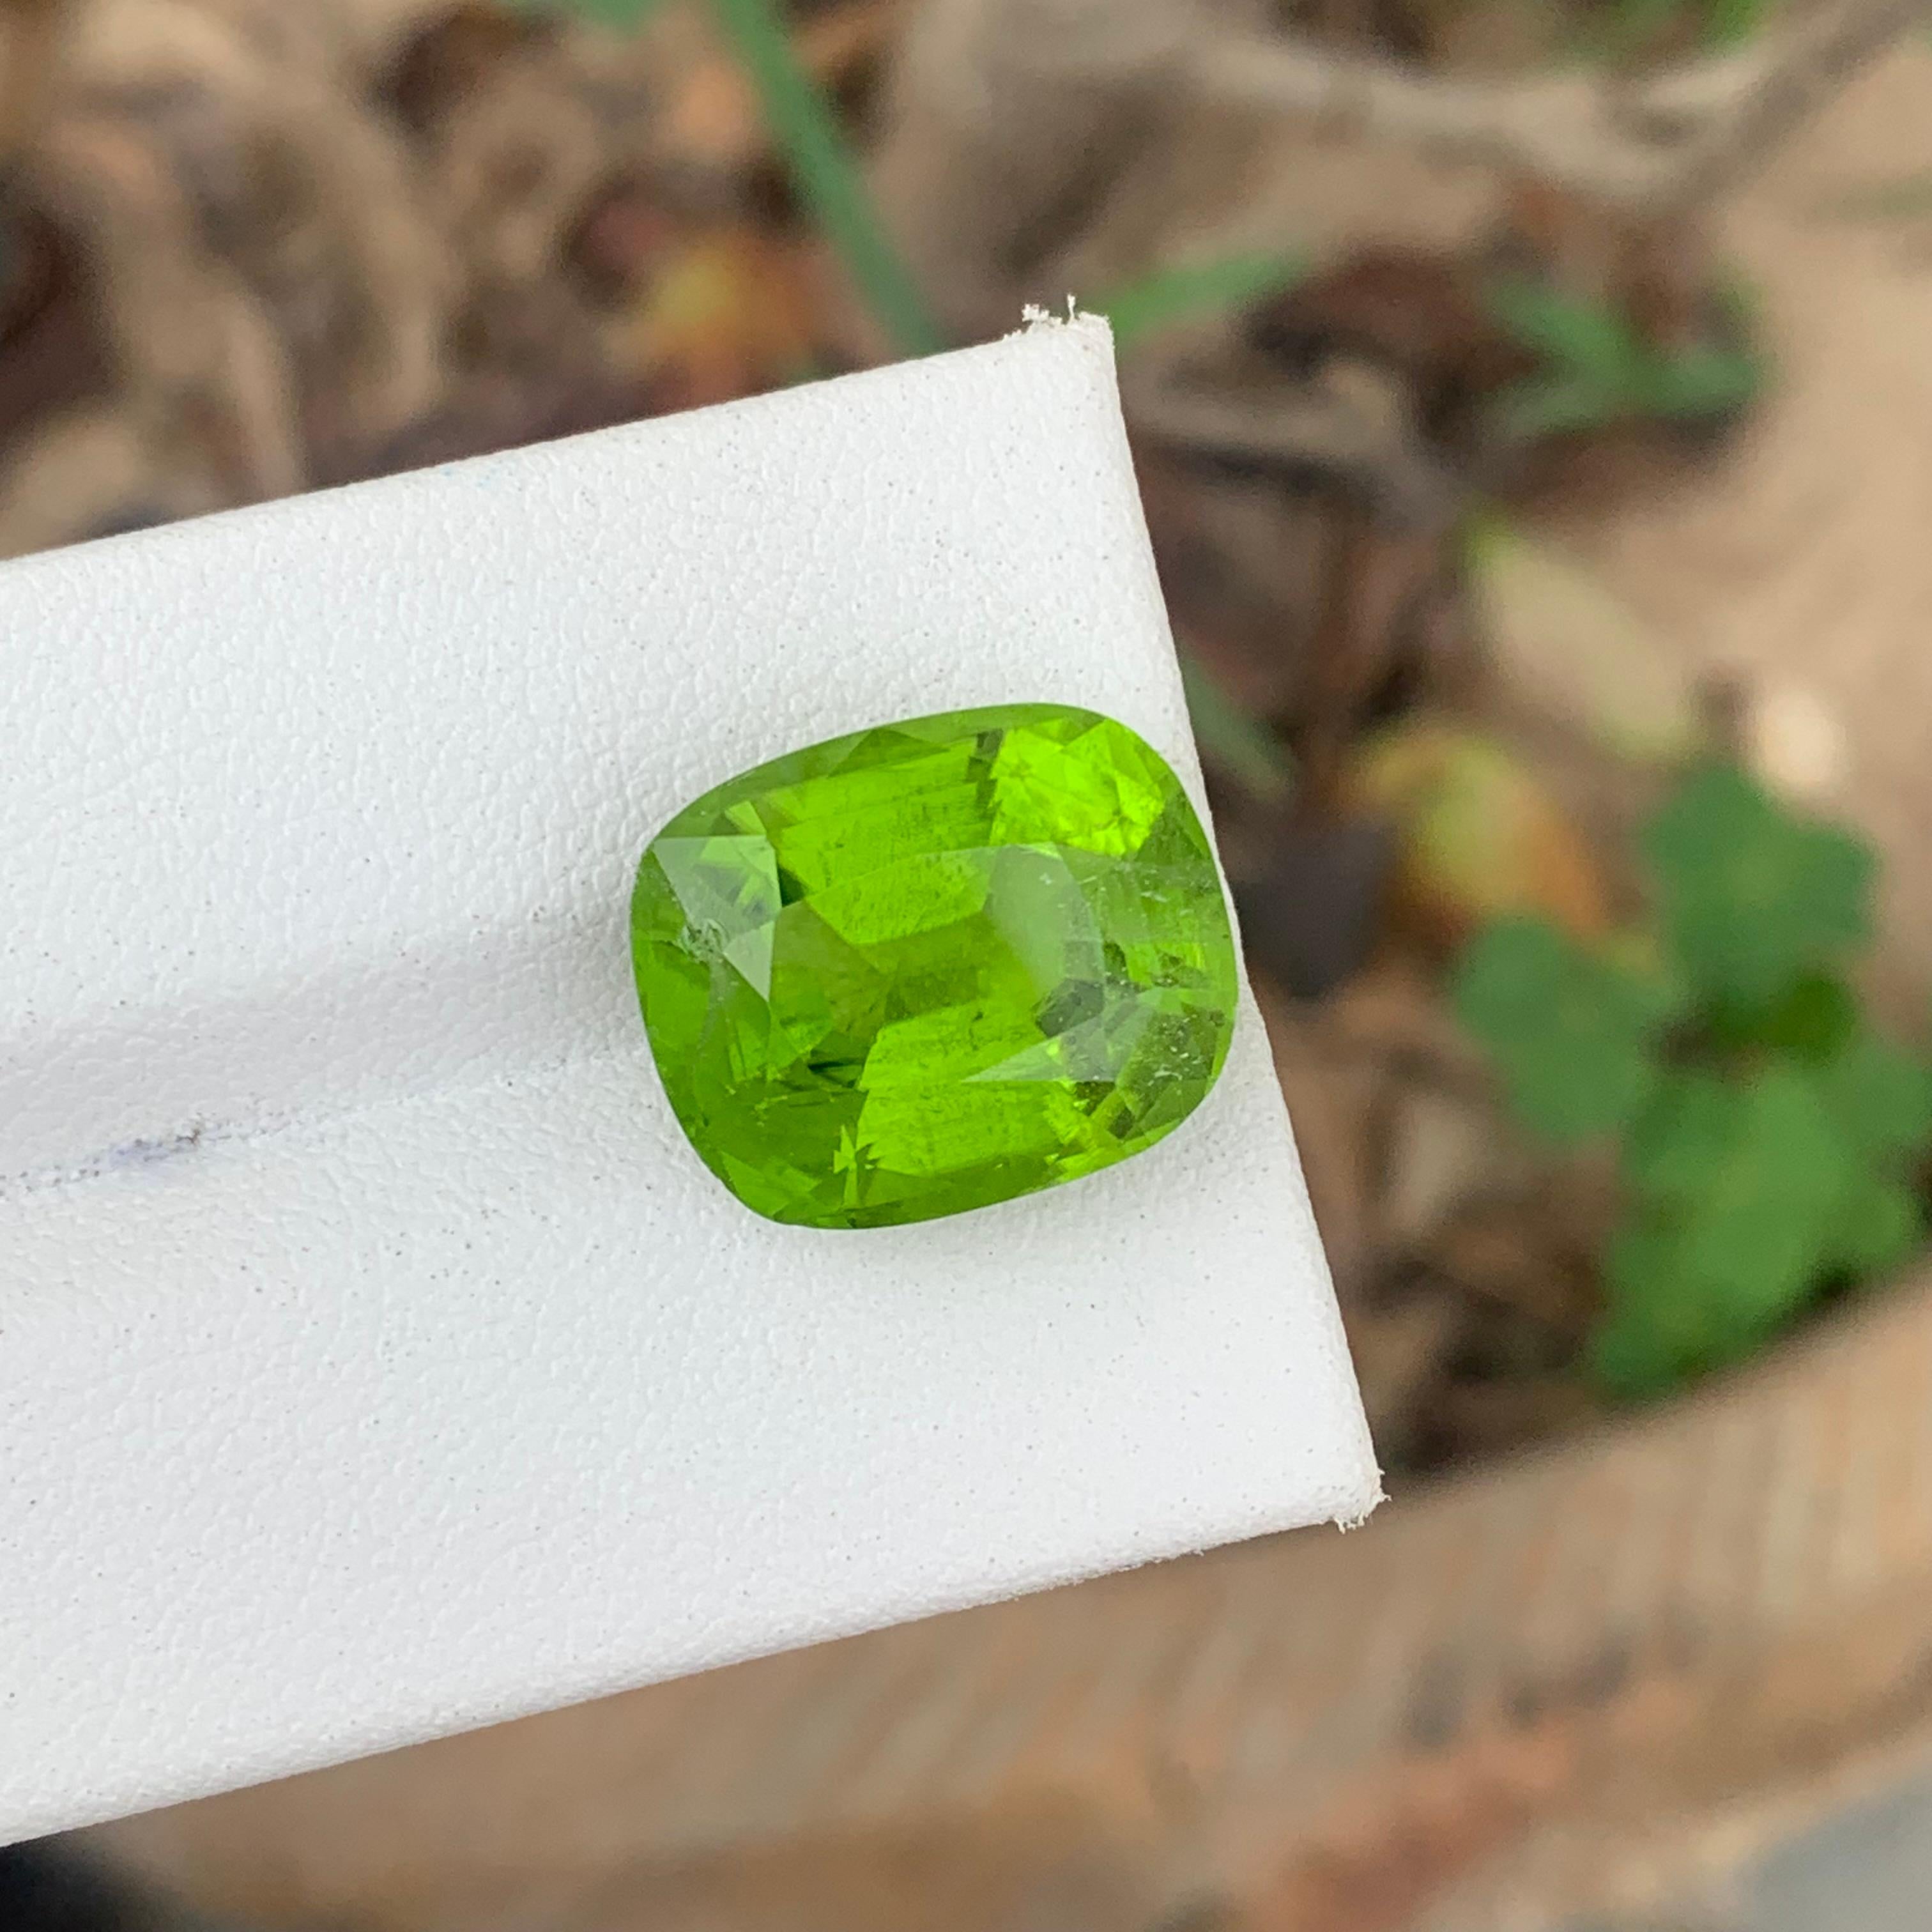 12.75 Carat Natural Cushion Cut Faceted Apple Green Peridot From Pakistan Mine For Sale 2